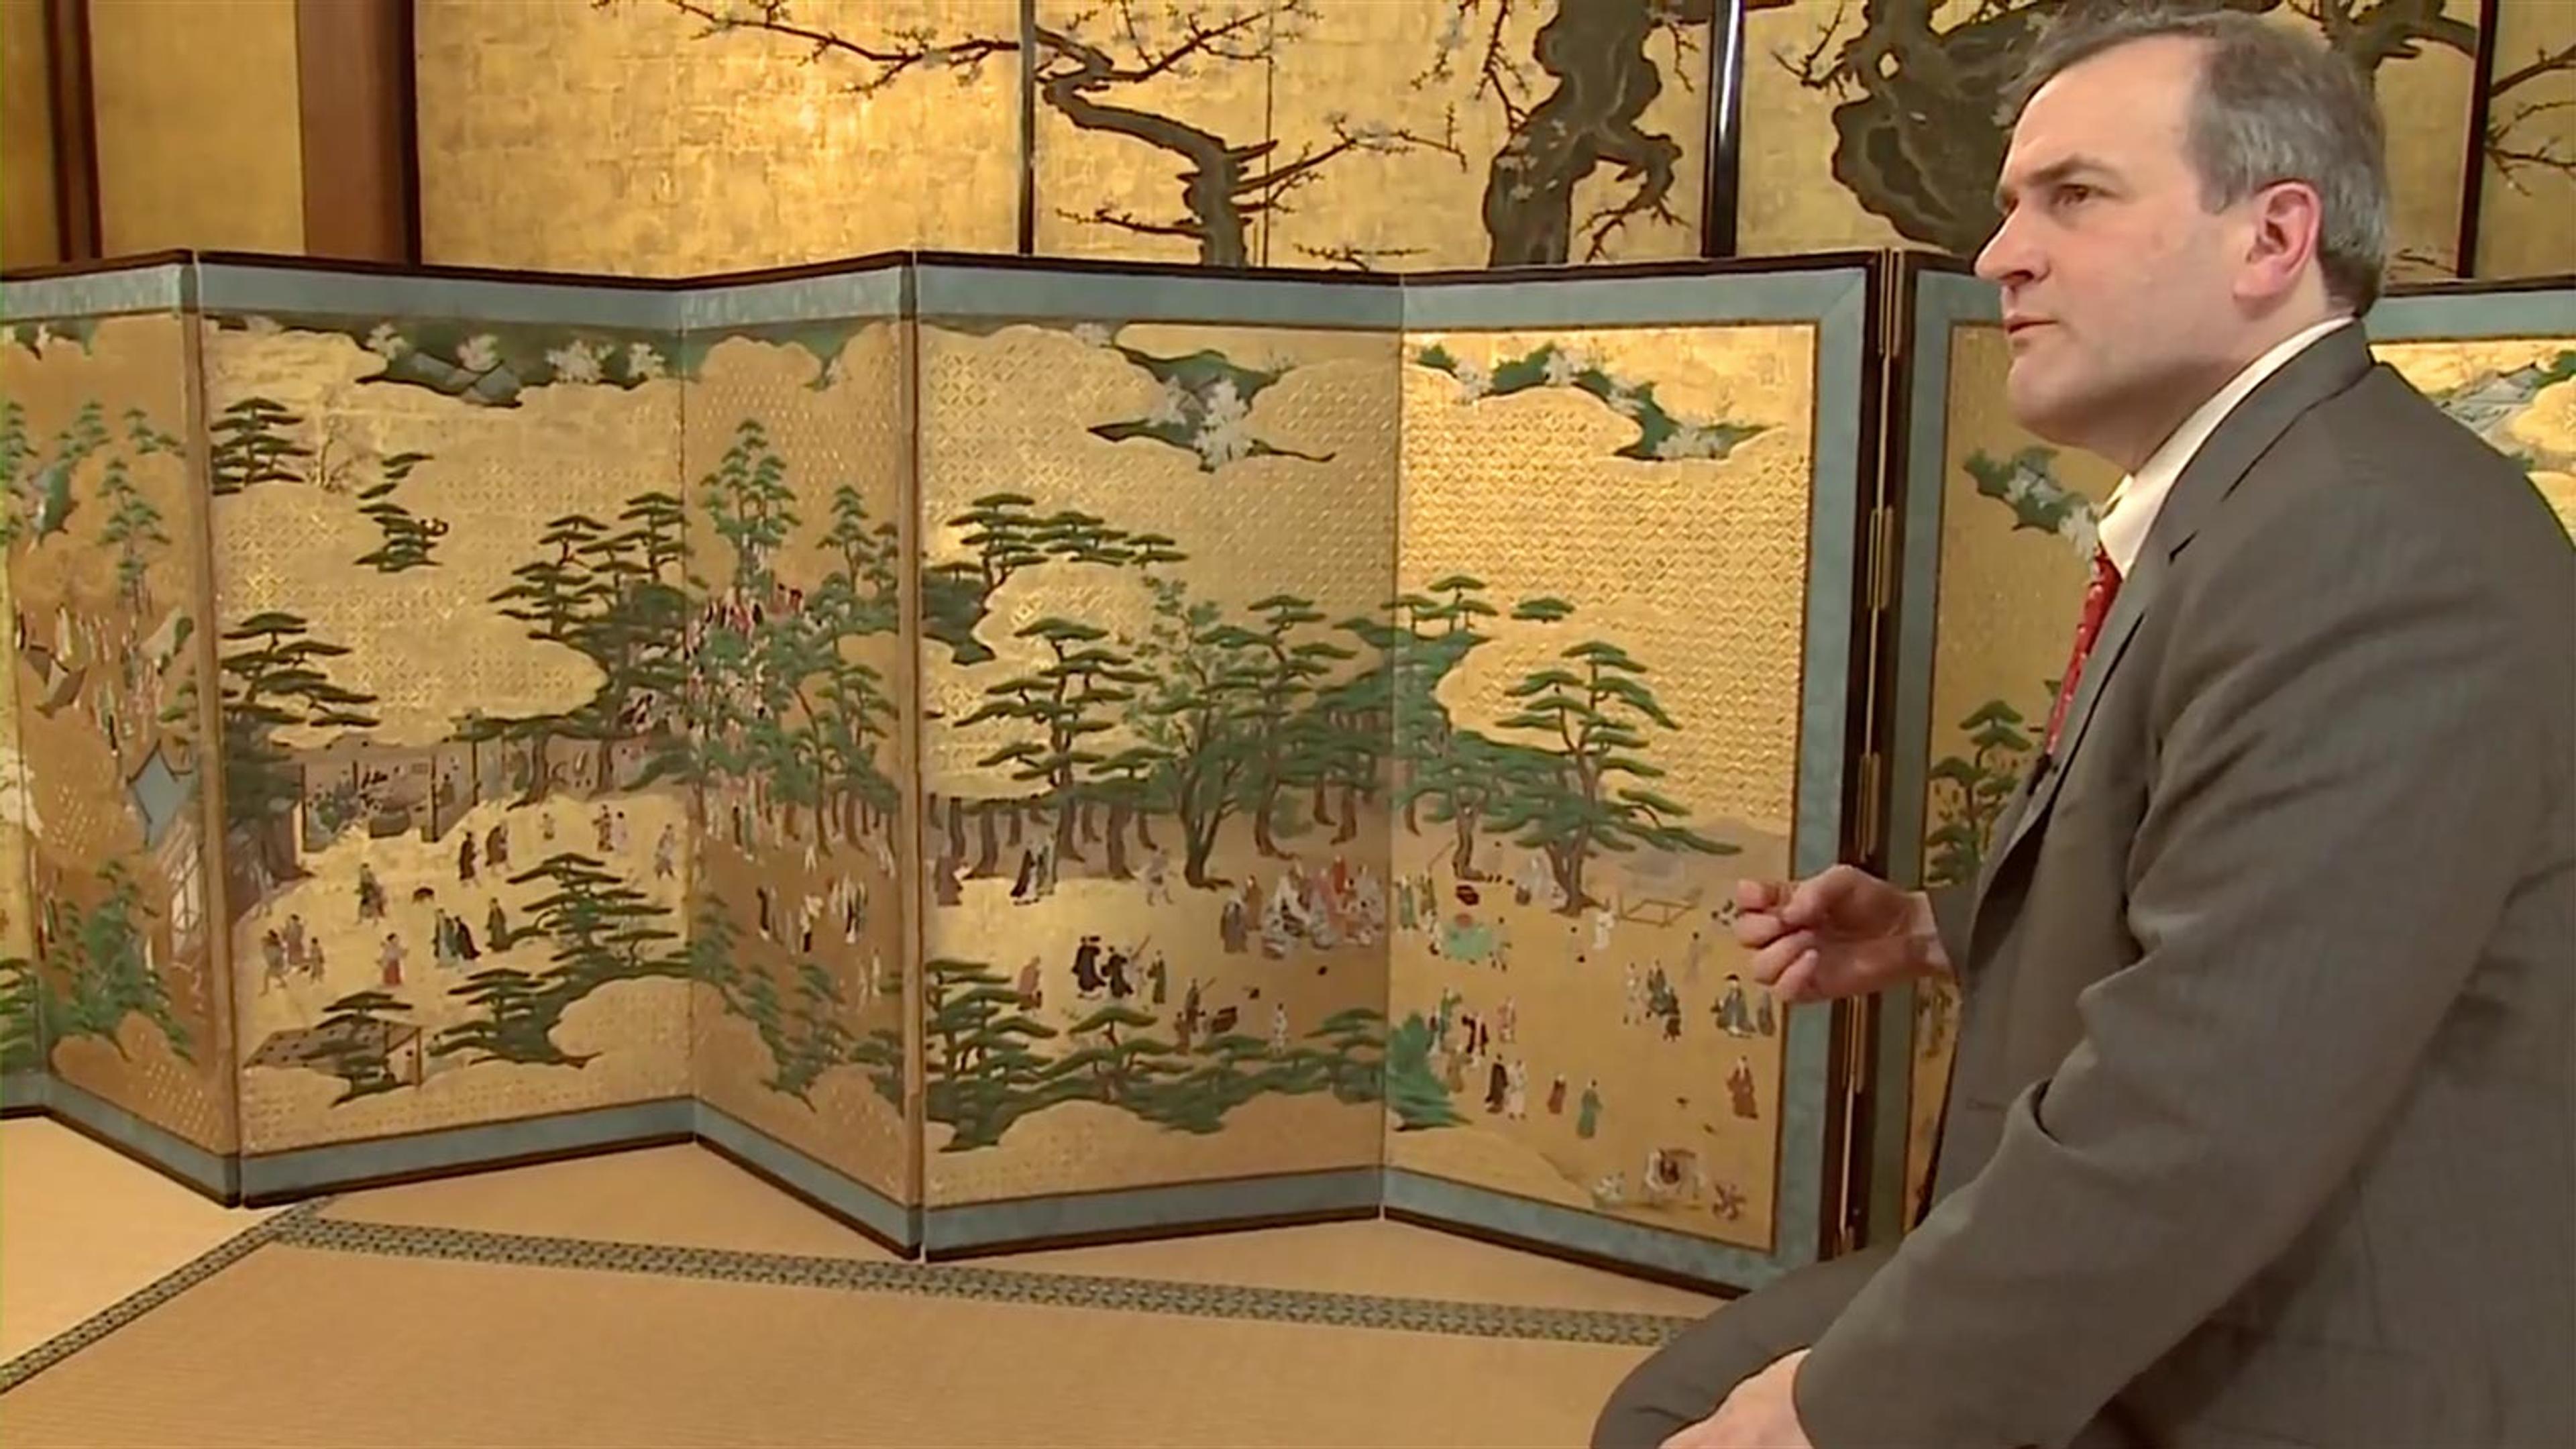 An ornate painted screen depicting scenes of daily life in Kyoto